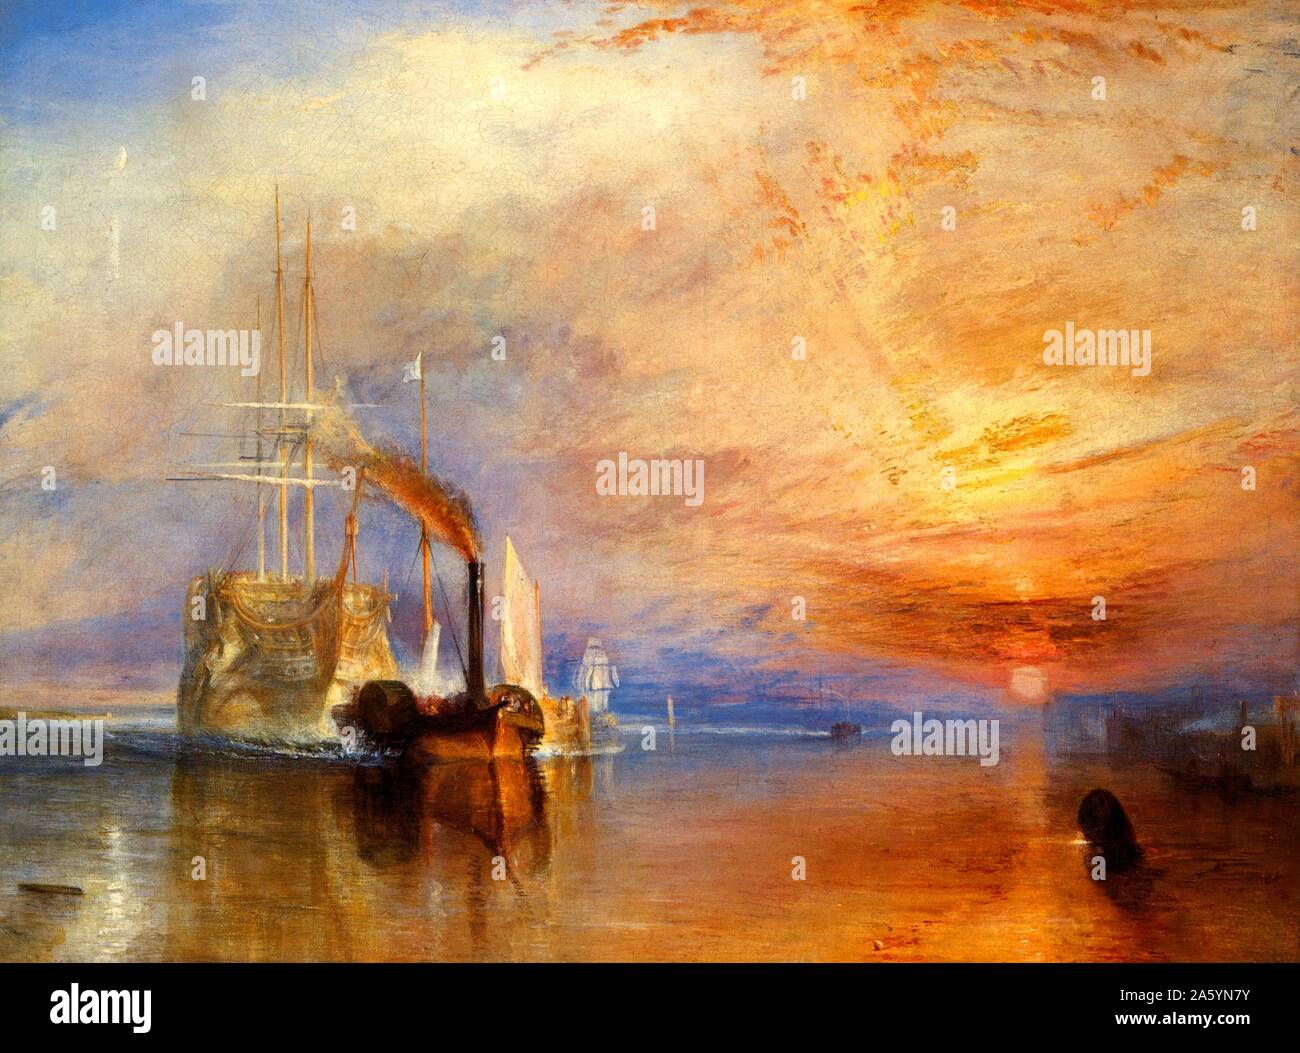 John William Turner English school The Fighting Temeraire 1839 Oil on canvas (90.7 x 121.6 cm) London, The National Gallery Stock Photo